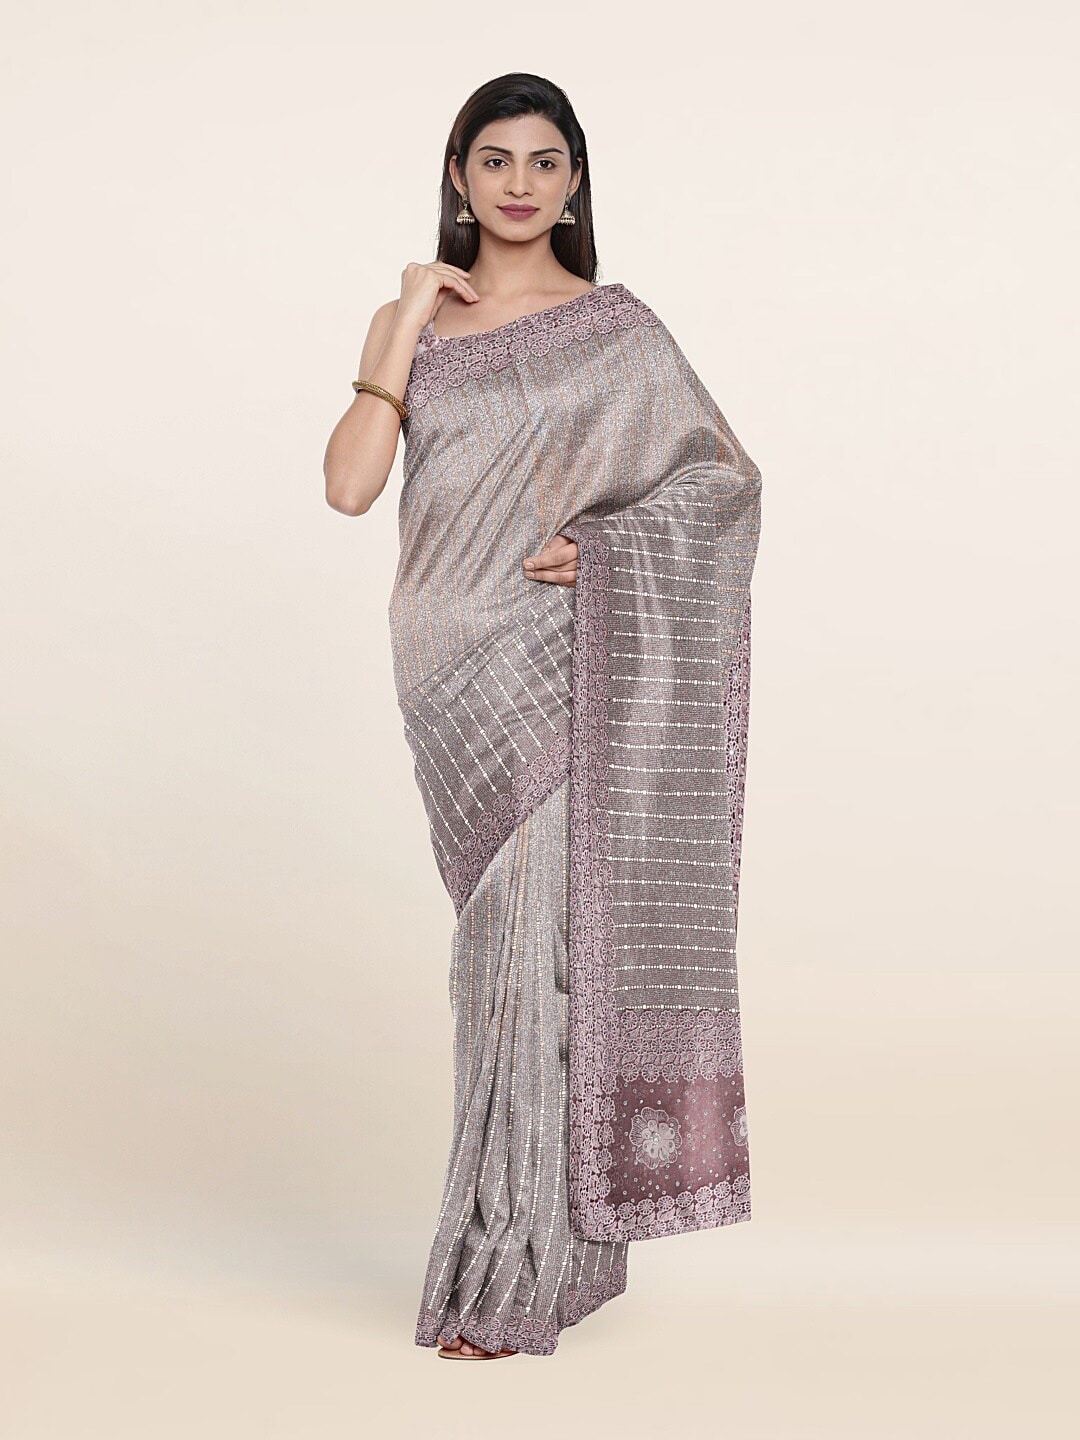 Pothys Lavender Striped Beads and Stones Saree Price in India